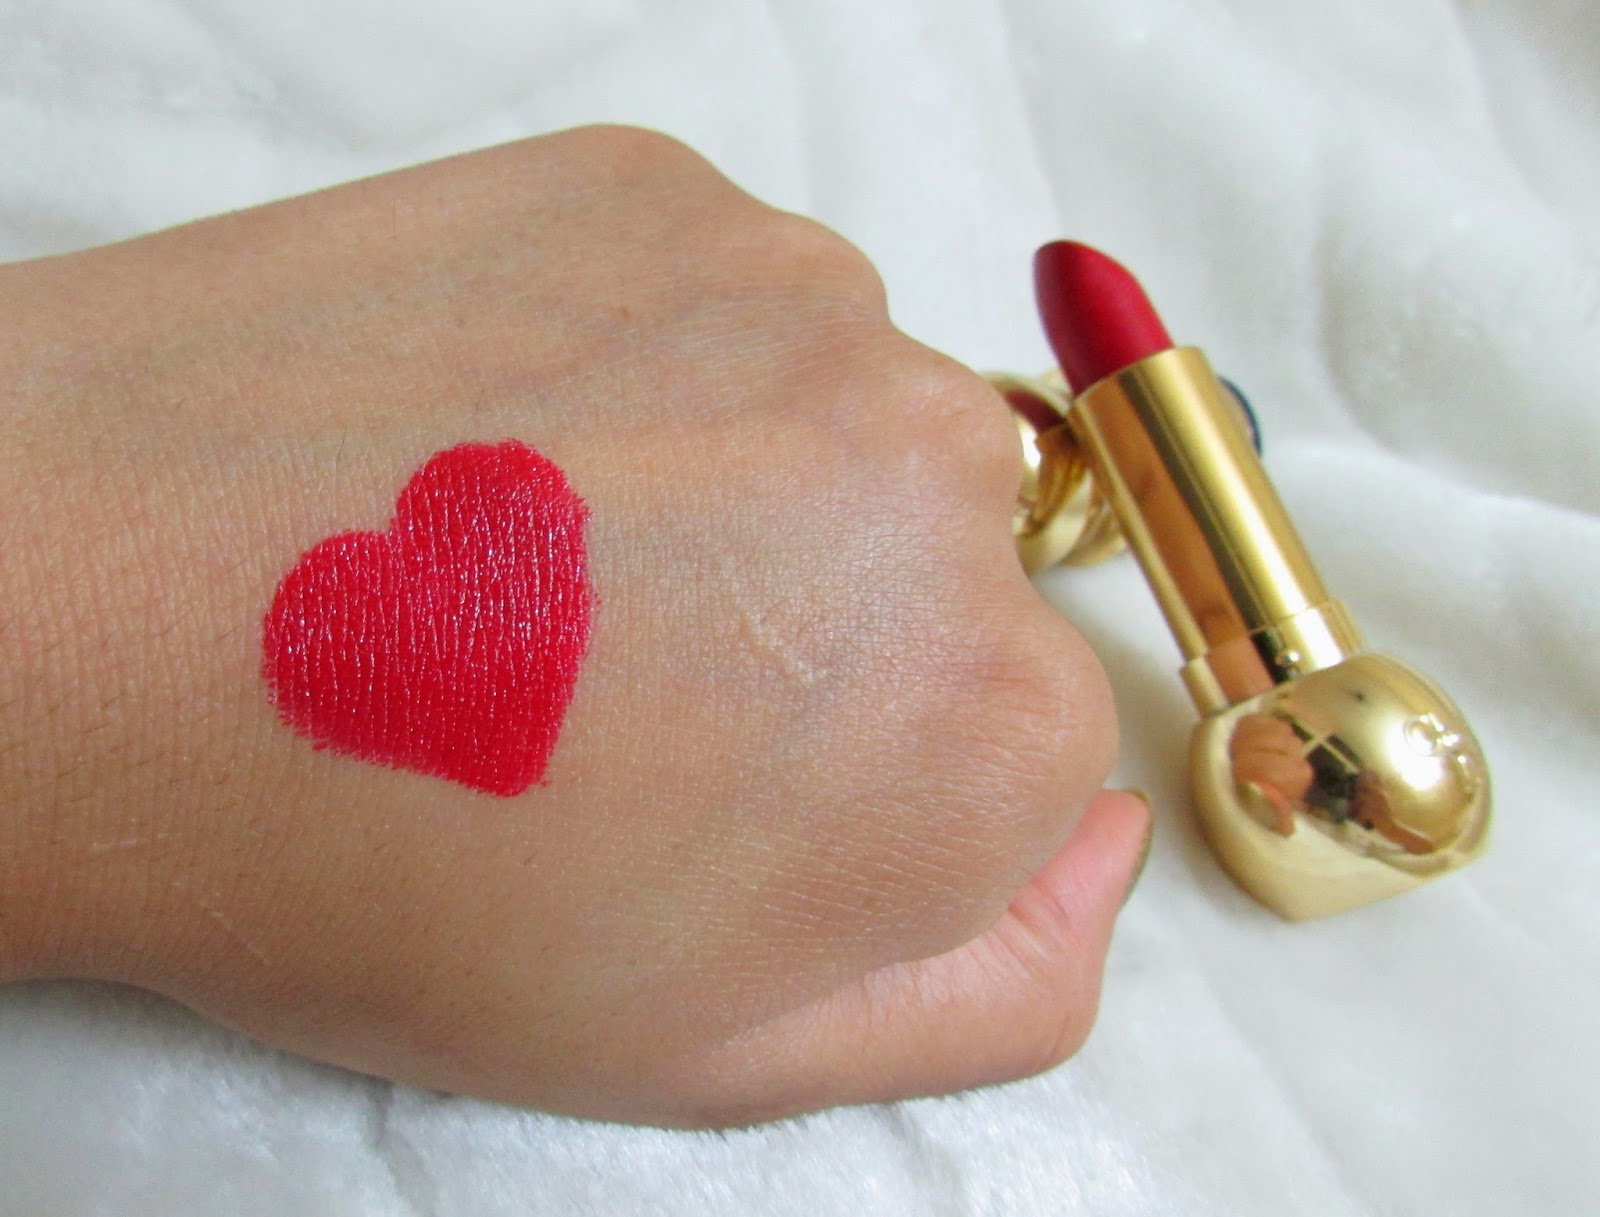 best red lipstick,red lipstick , lips , perfect red lipstick , dior , dior review , dior red lipstick review, dior ange bleu , dioe ange blew review, dior ange blue review price , dioe ange bleu price in india, dior ange blue review india , dior india, dior makeup , dior price india, dior lipstick price india